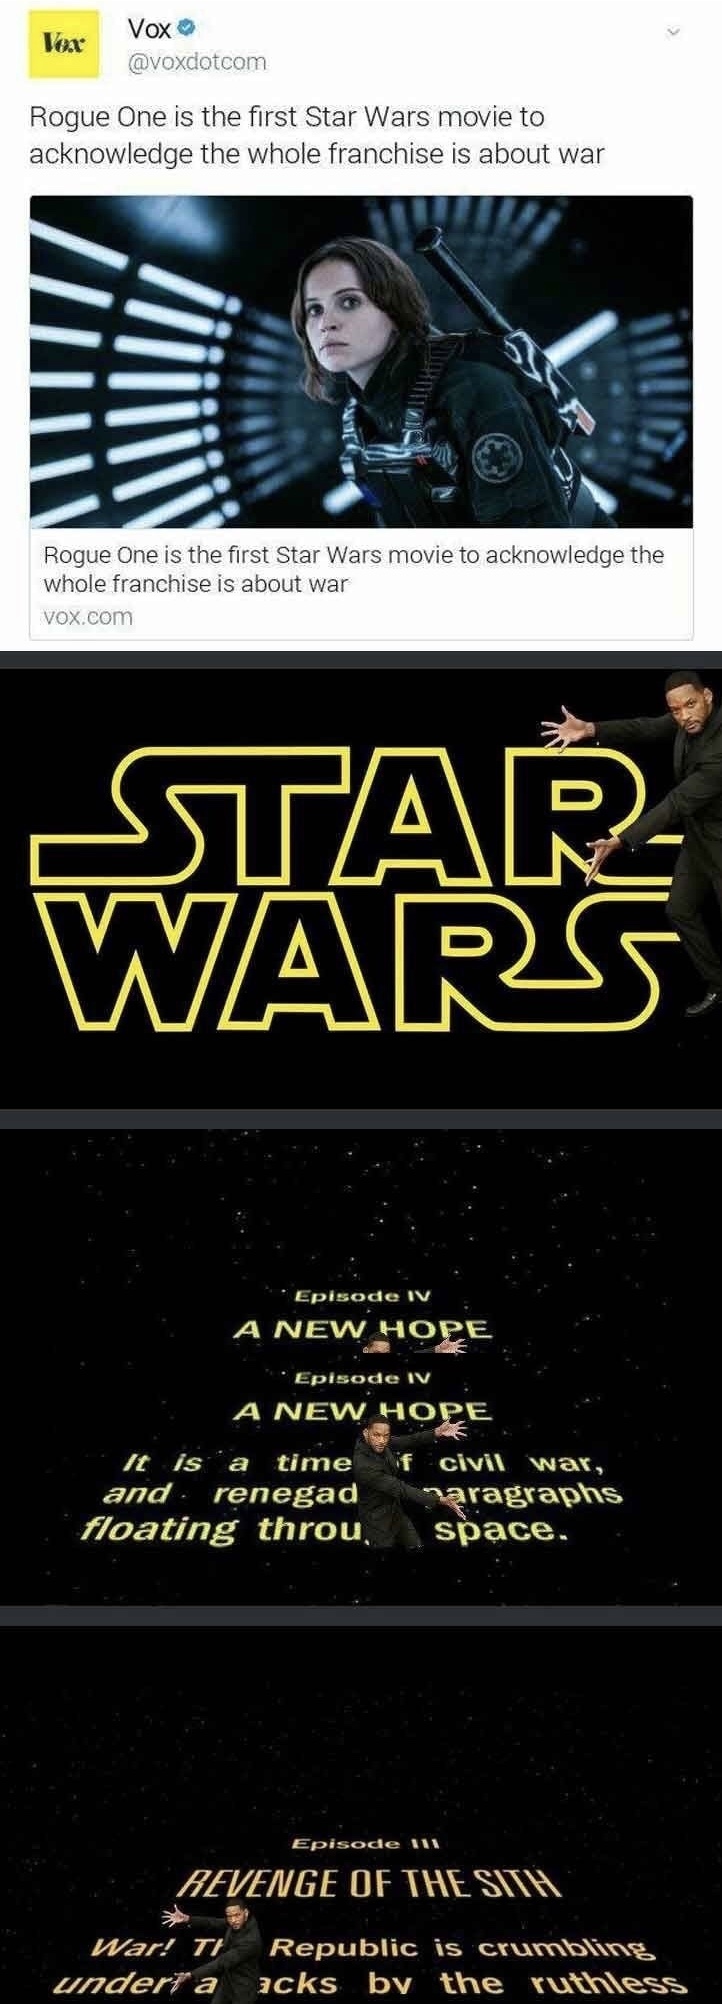 will smith star wars meme - Vax Vox Rogue One is the first Star Wars movie to acknowledge the whole franchise is about war Rogue One is the first Star Wars movie to acknowledge the whole franchise is about war Vox.com Tar Wars Episode Iv A New Hope Episod